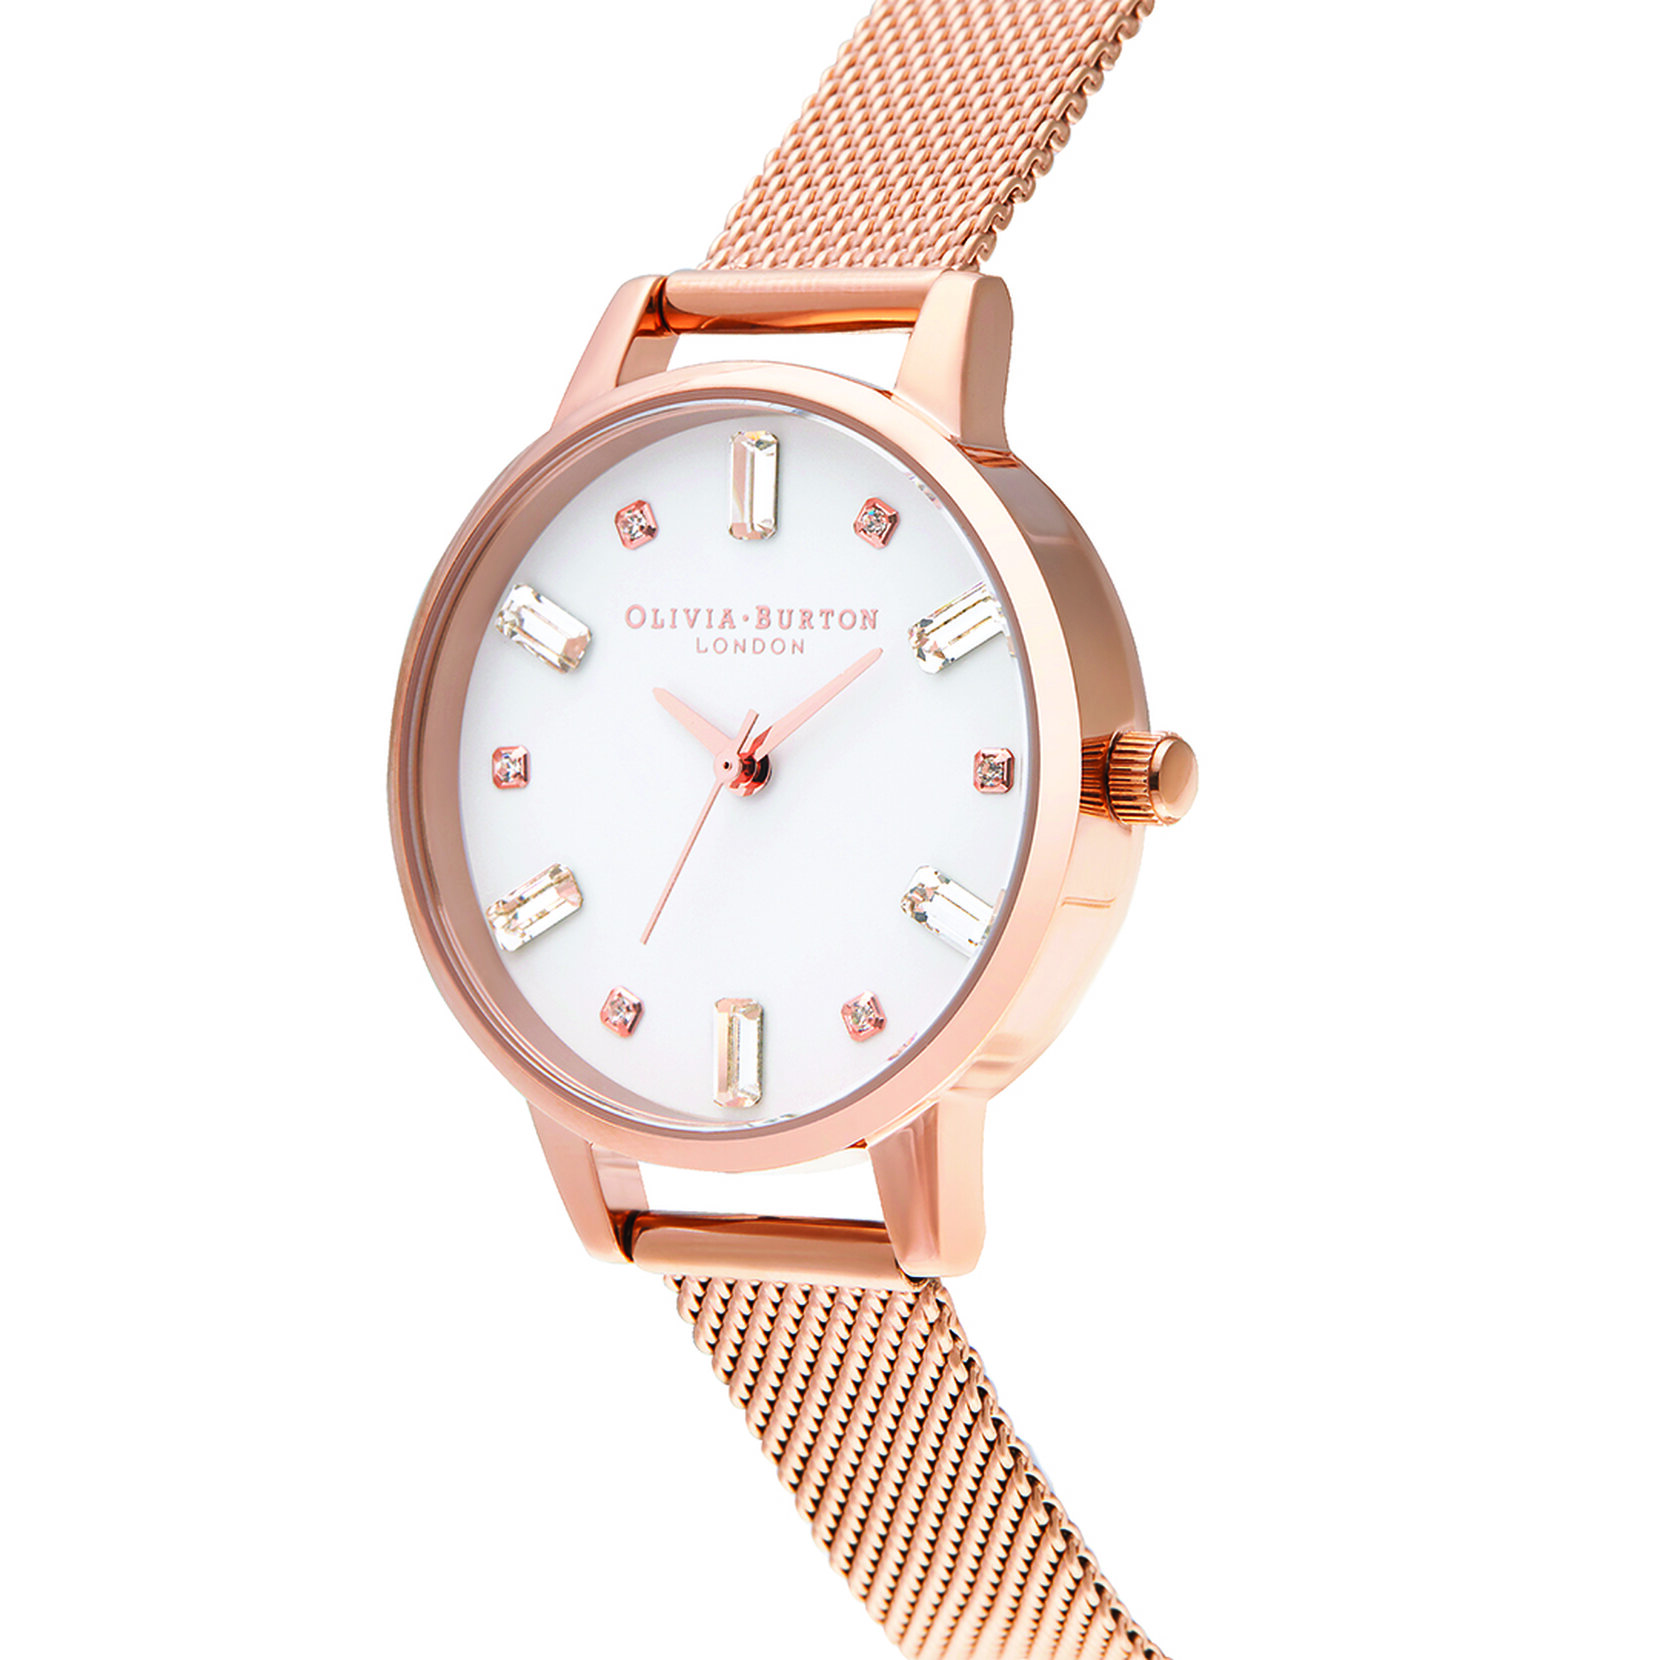 Bejewelled Rose Gold Mesh Watch